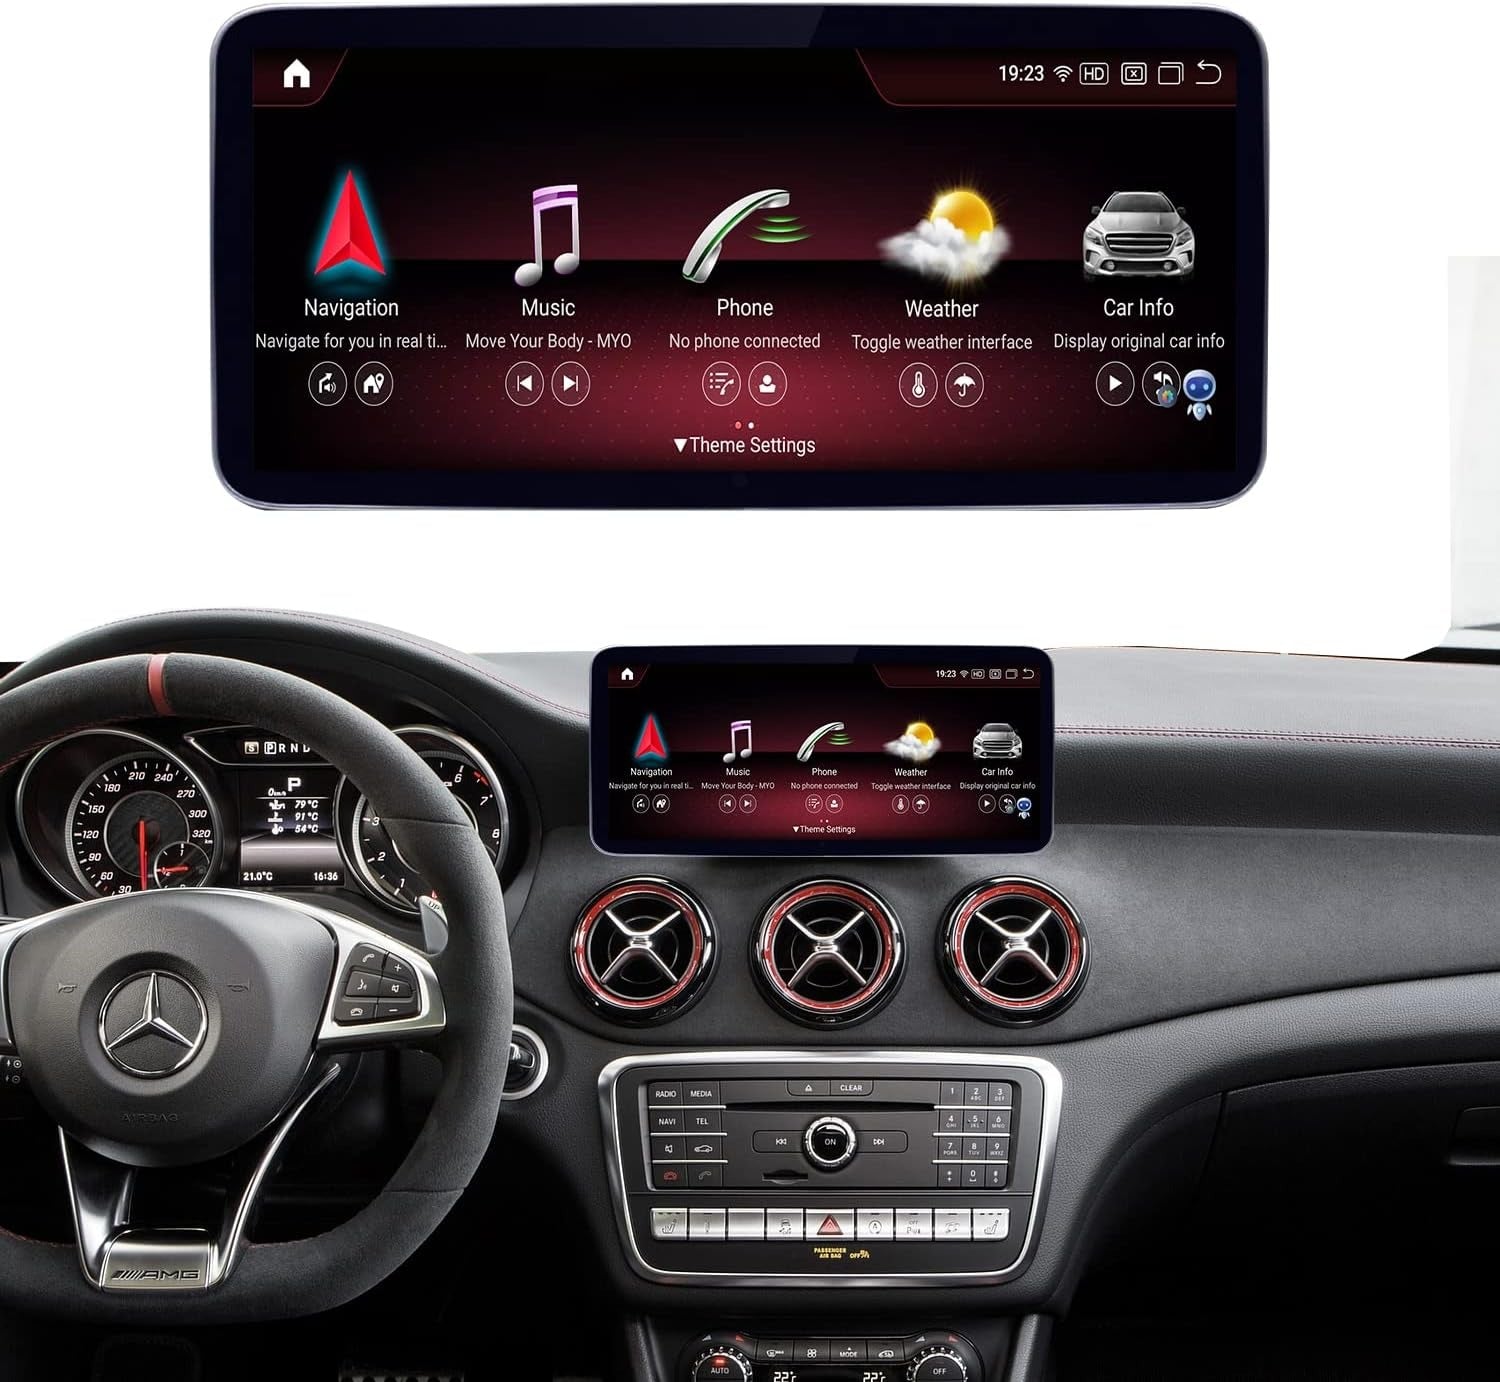 Mercedes-Benz GLA-Class (X156) Android 12 Multimedia 10.25"/12.3" Touchscreen Display + Built-in Wireless CarPlay & Android Auto